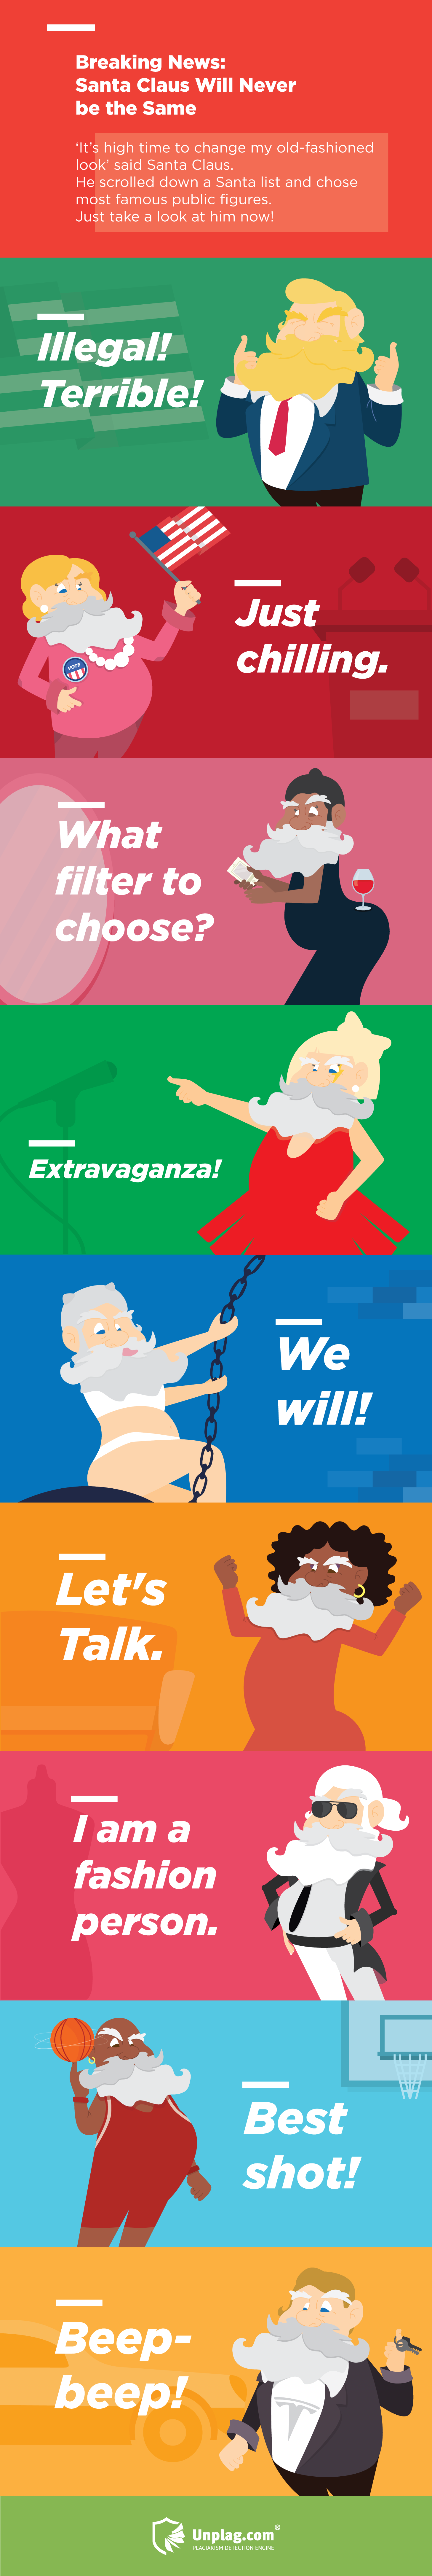 Christmas News Santa Looks Different Infographic by Unplag